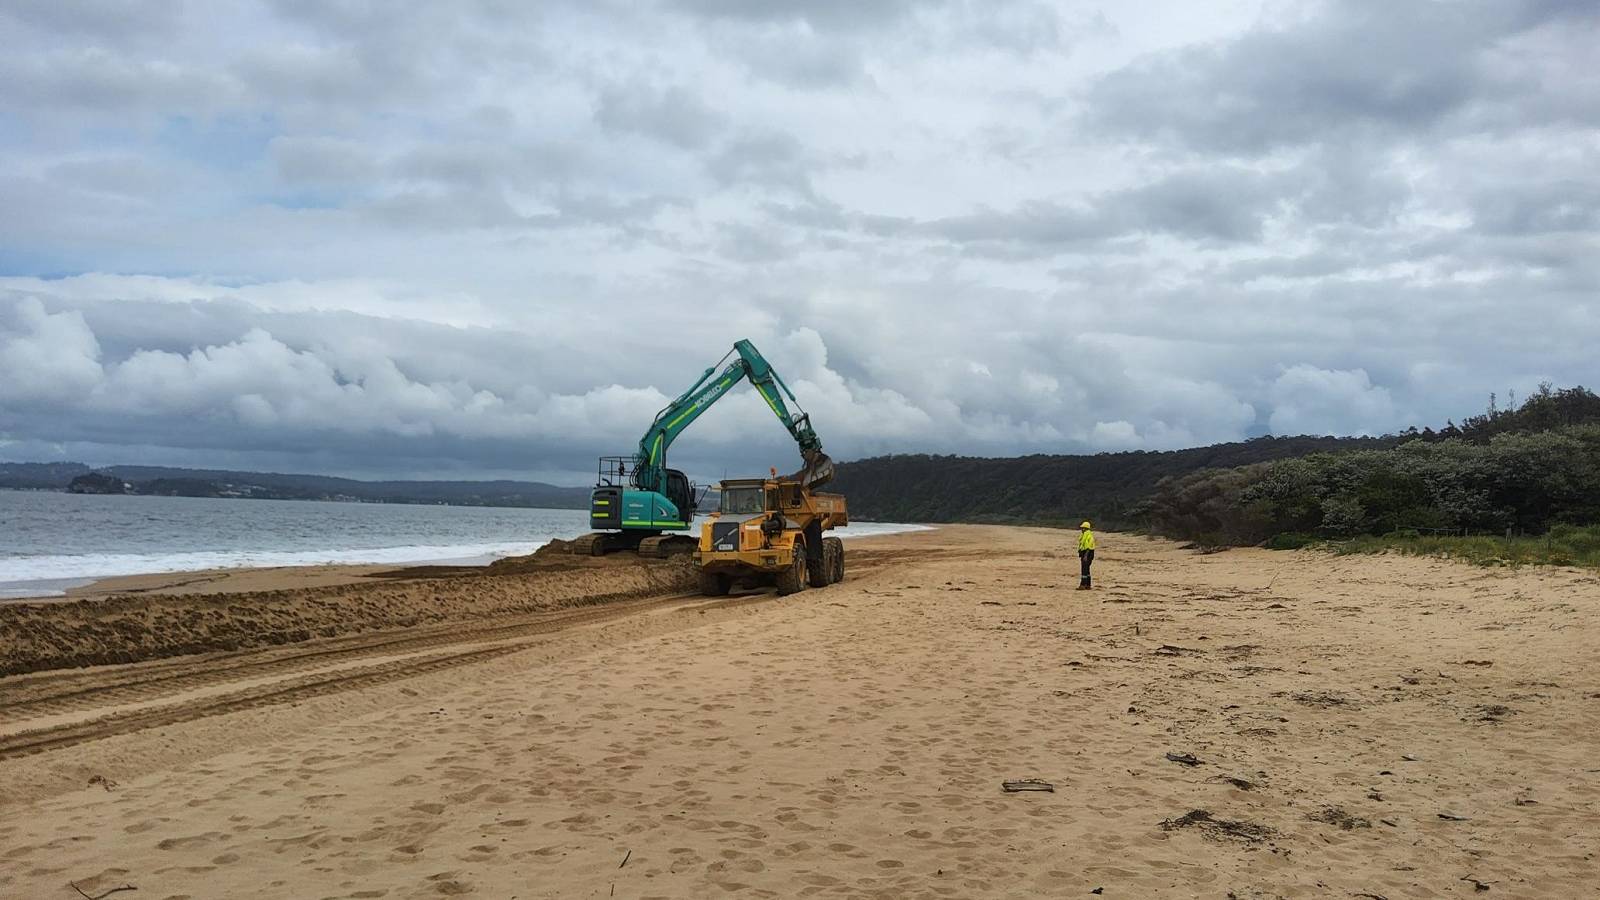 Image An excavator loads a dump truck with sand from the foreshore of the sea.